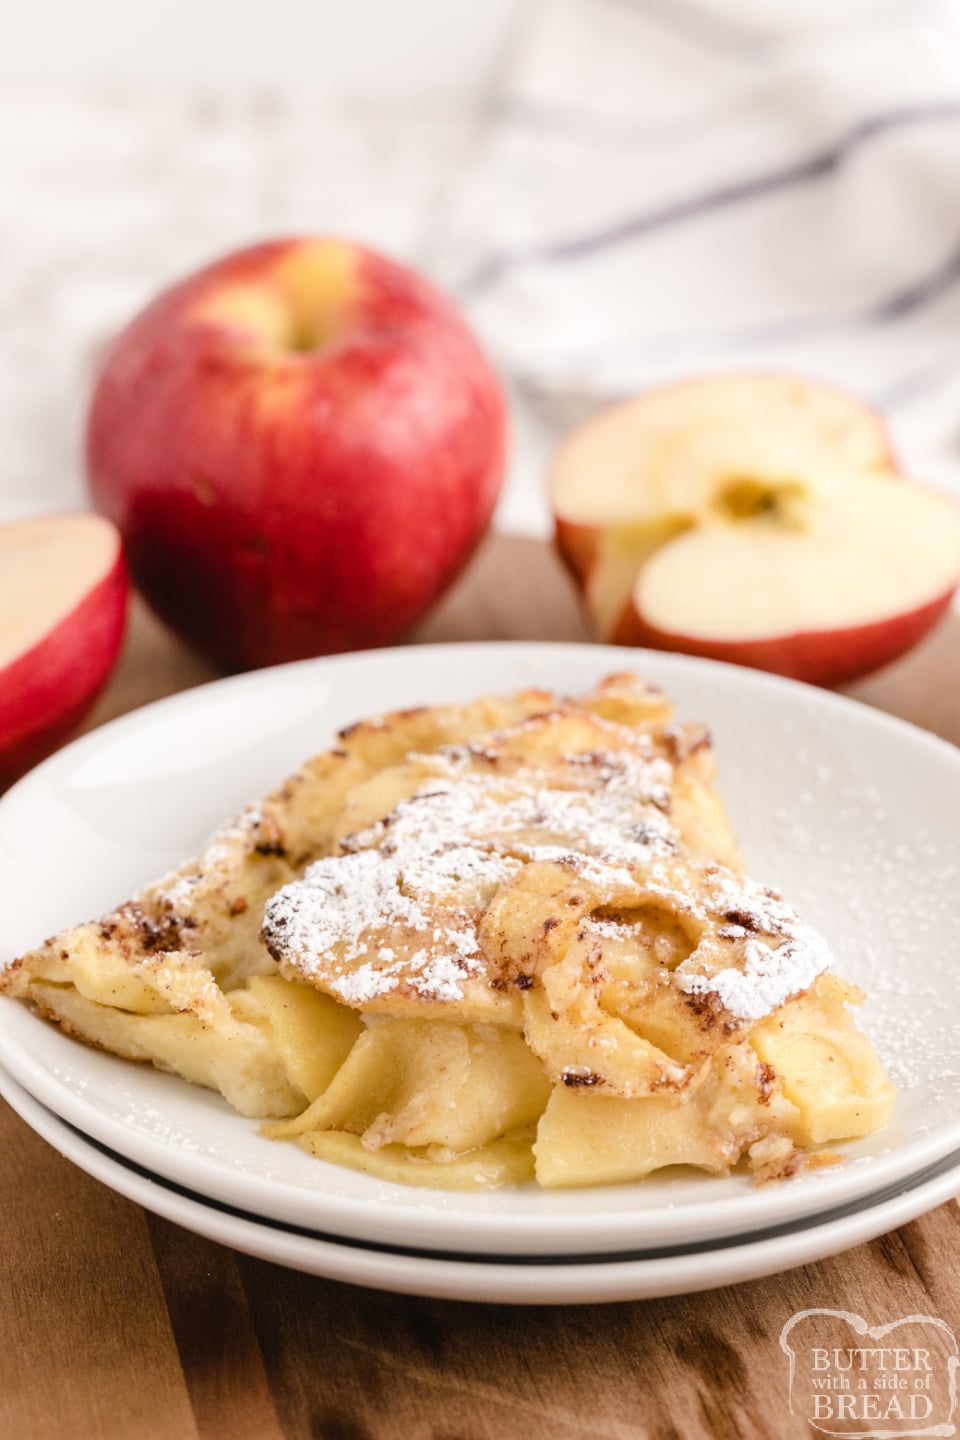 Apple German Pancake, also known as a Dutch Baby Pancake, made with flour, milk, eggs and fresh apples. The apples add so much flavor to this classic German pancake recipe!